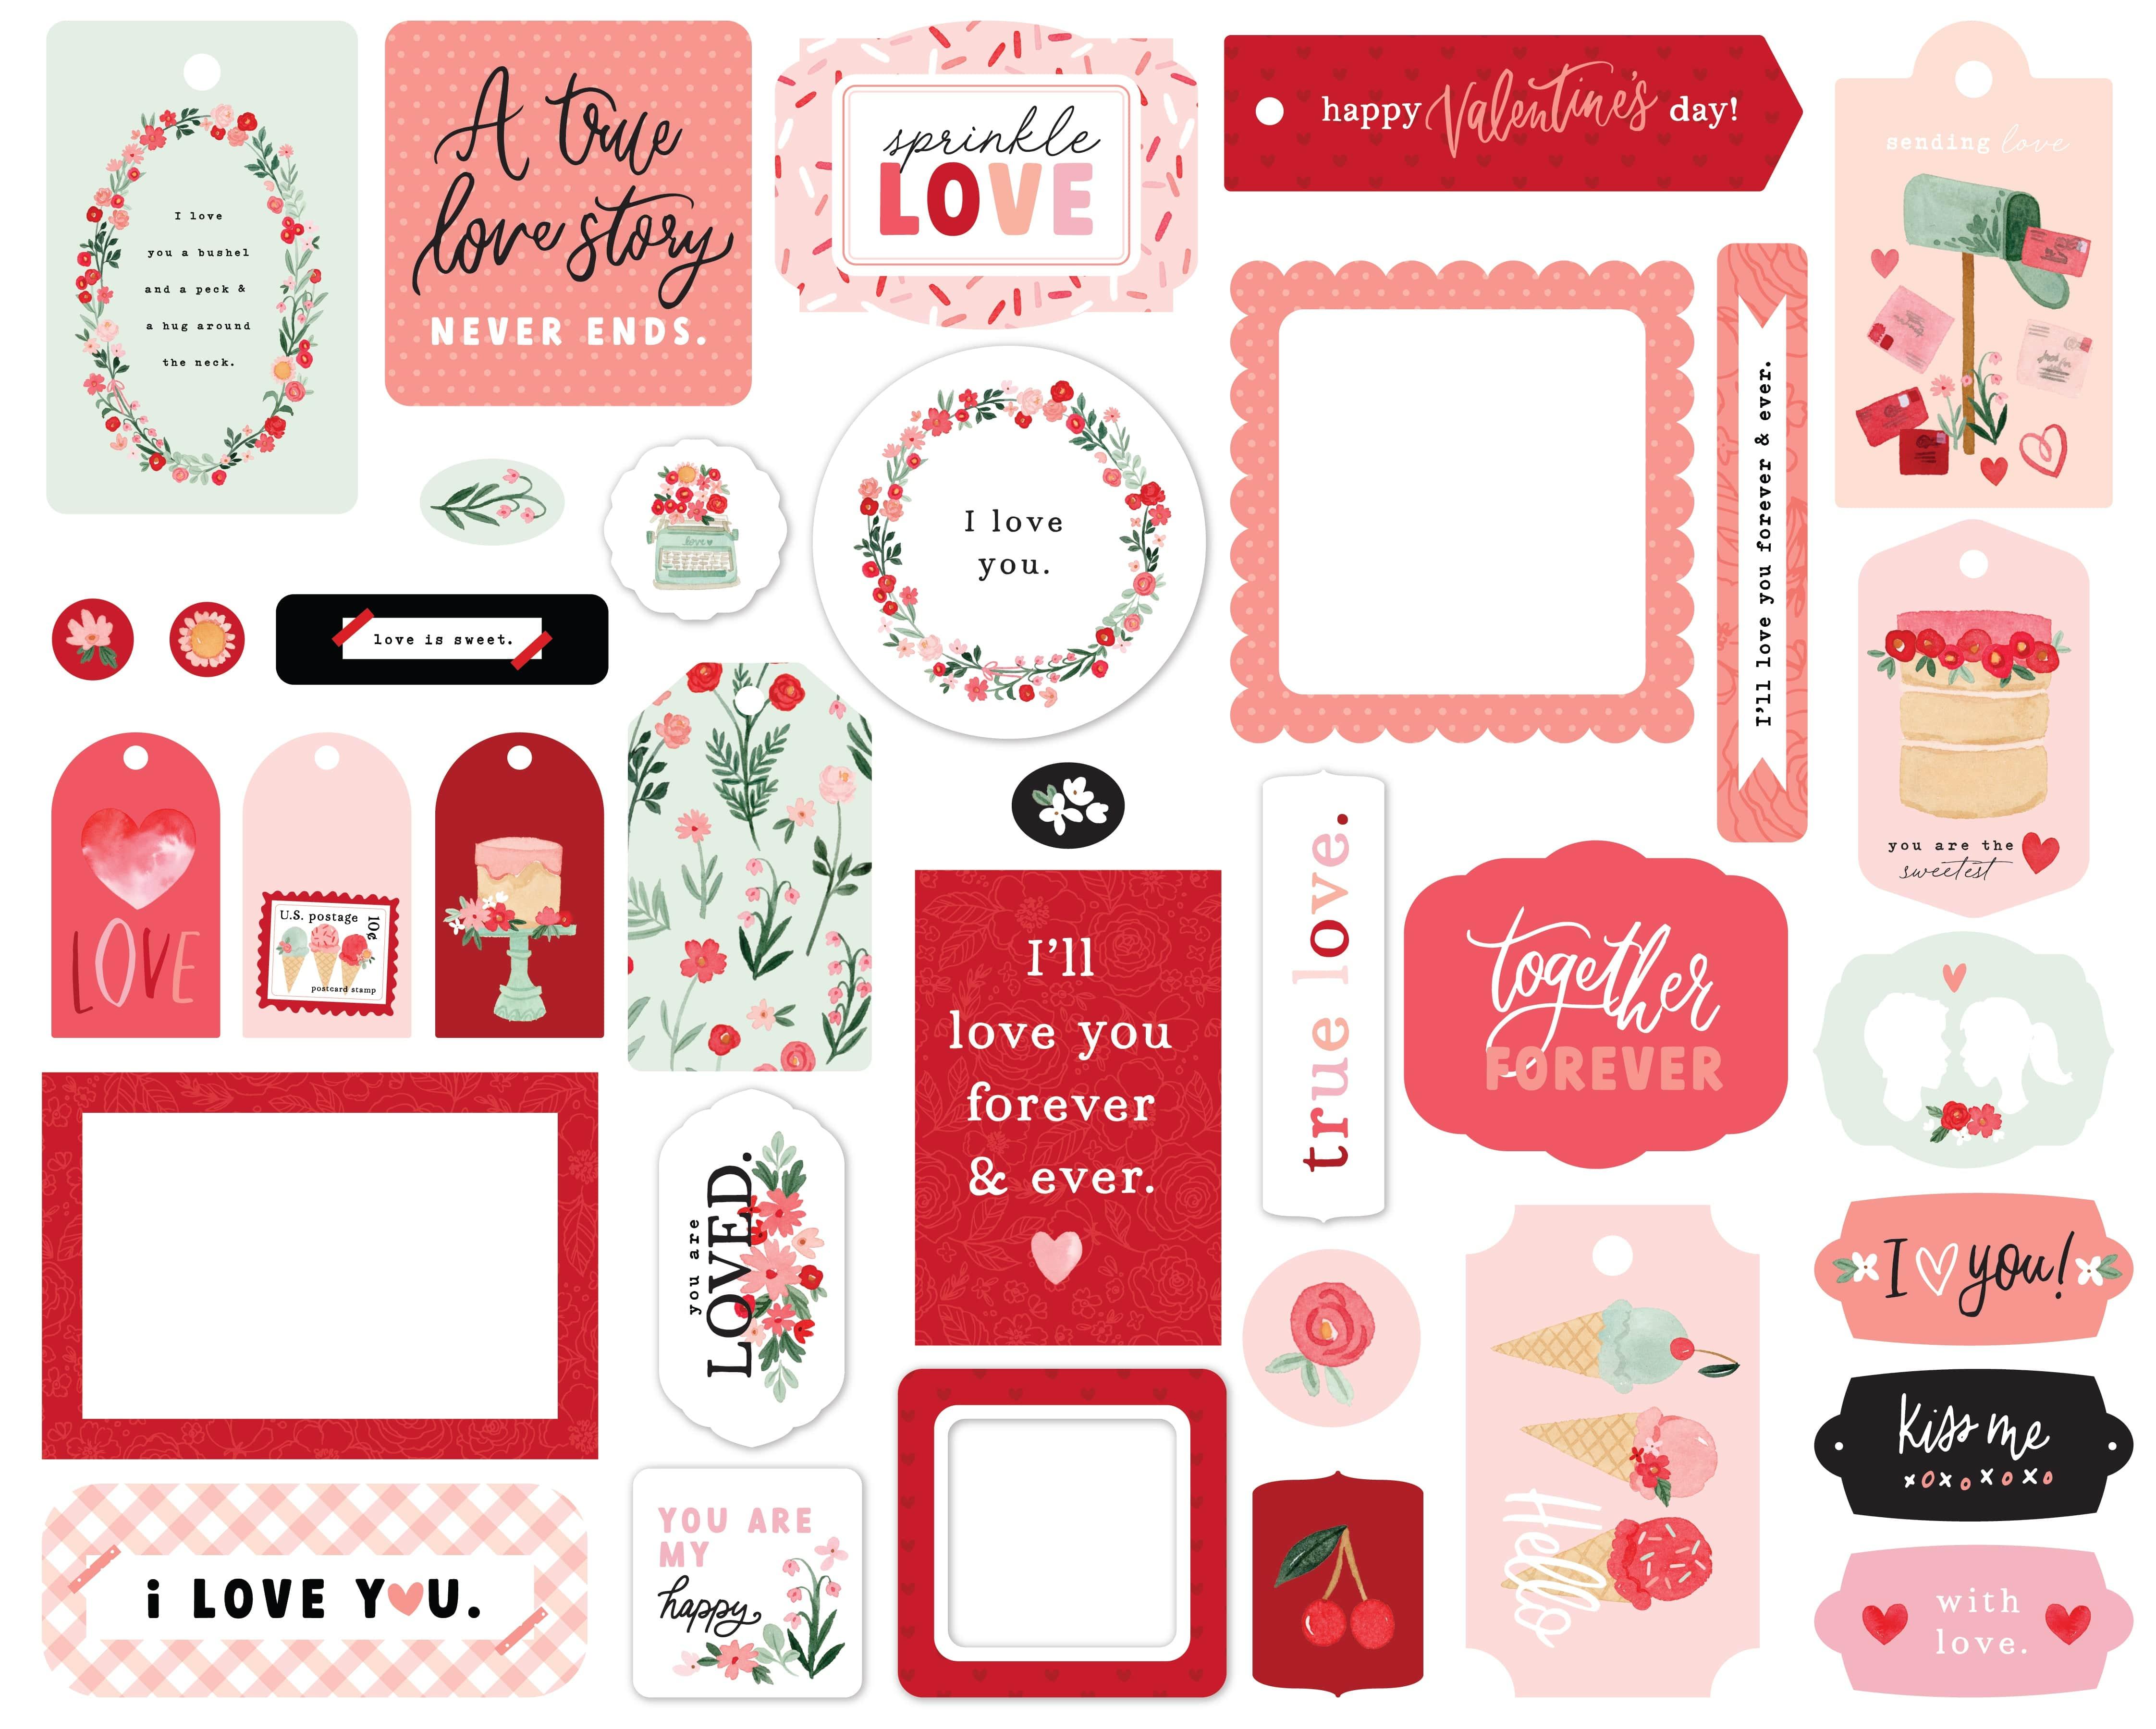 My Valentine Collection 5 x 5 Scrapbook Frames & Tags Die Cuts by Carta Bella - Scrapbook Supply Companies